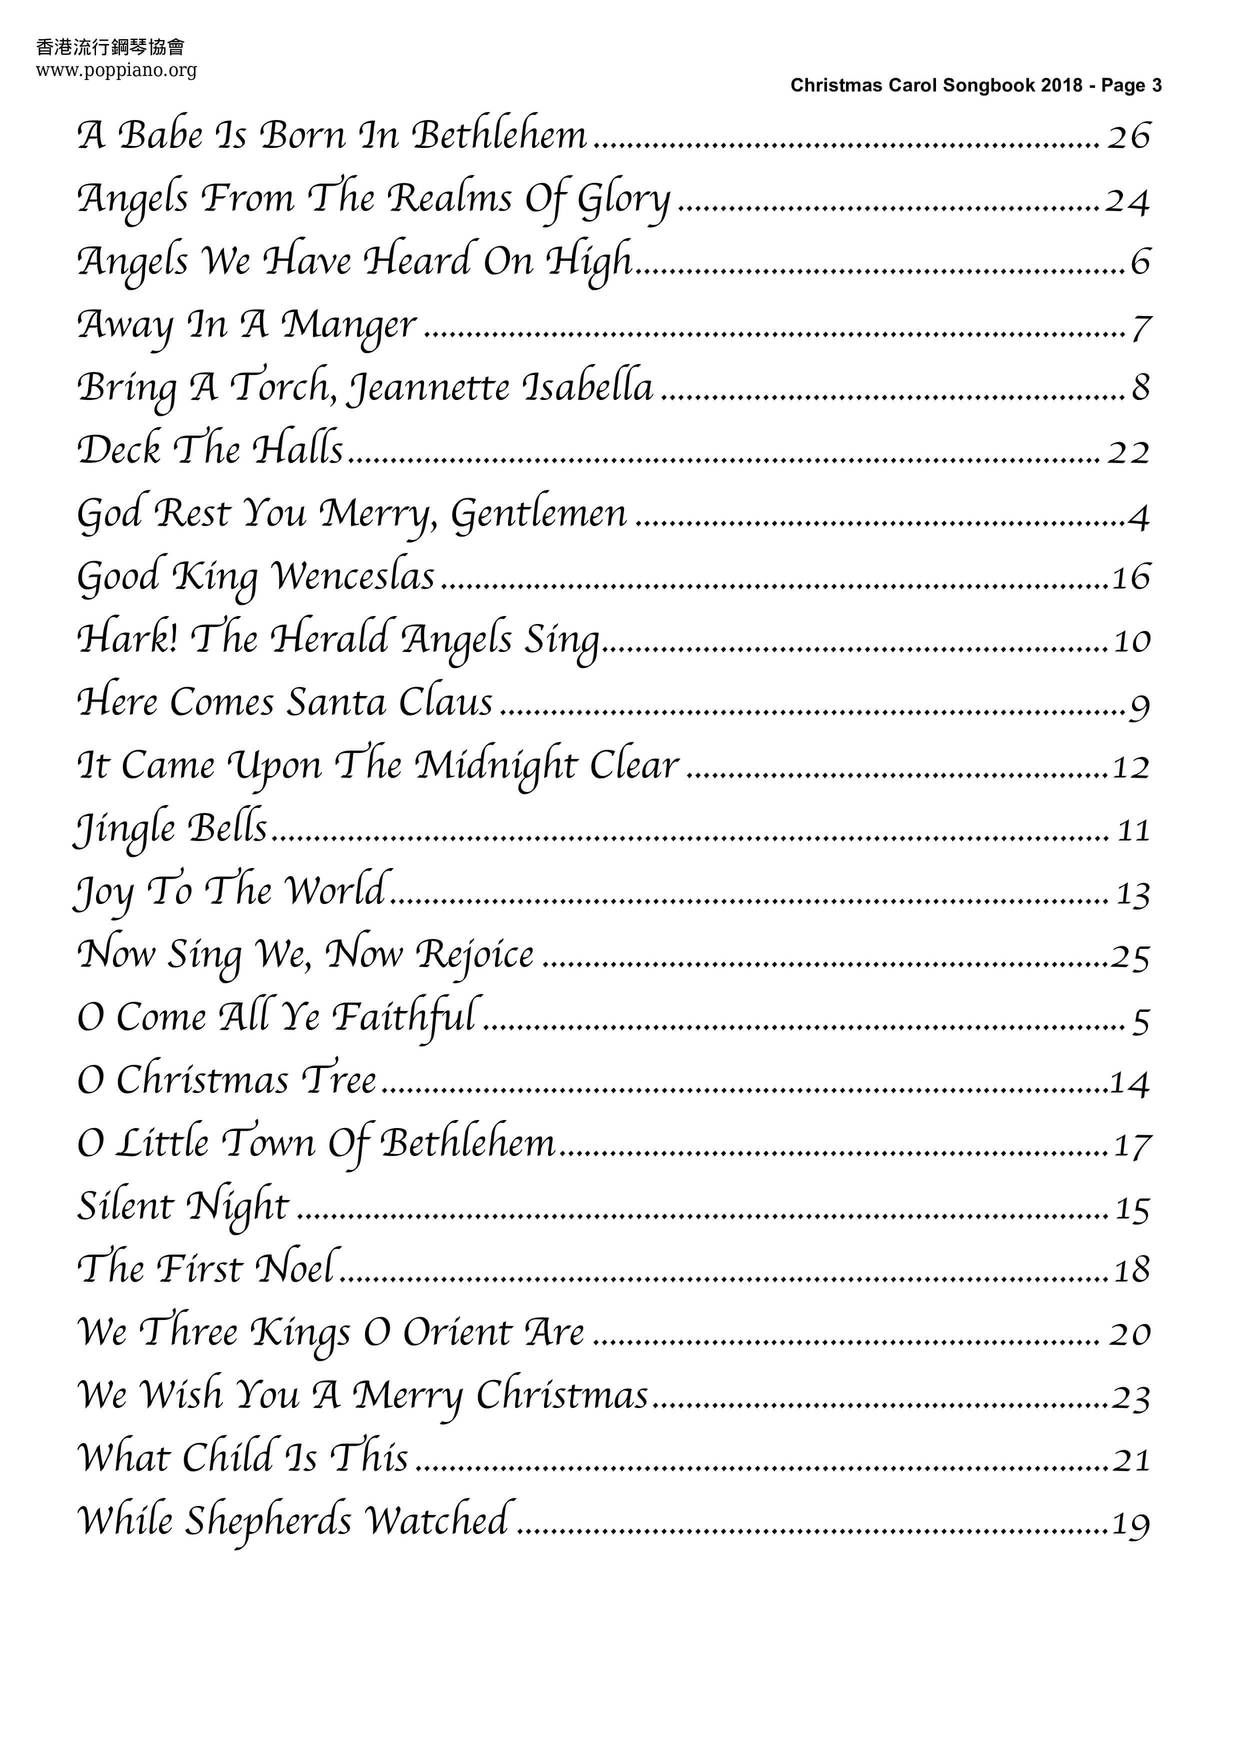 Christmas Songbook 28 Pages琴谱